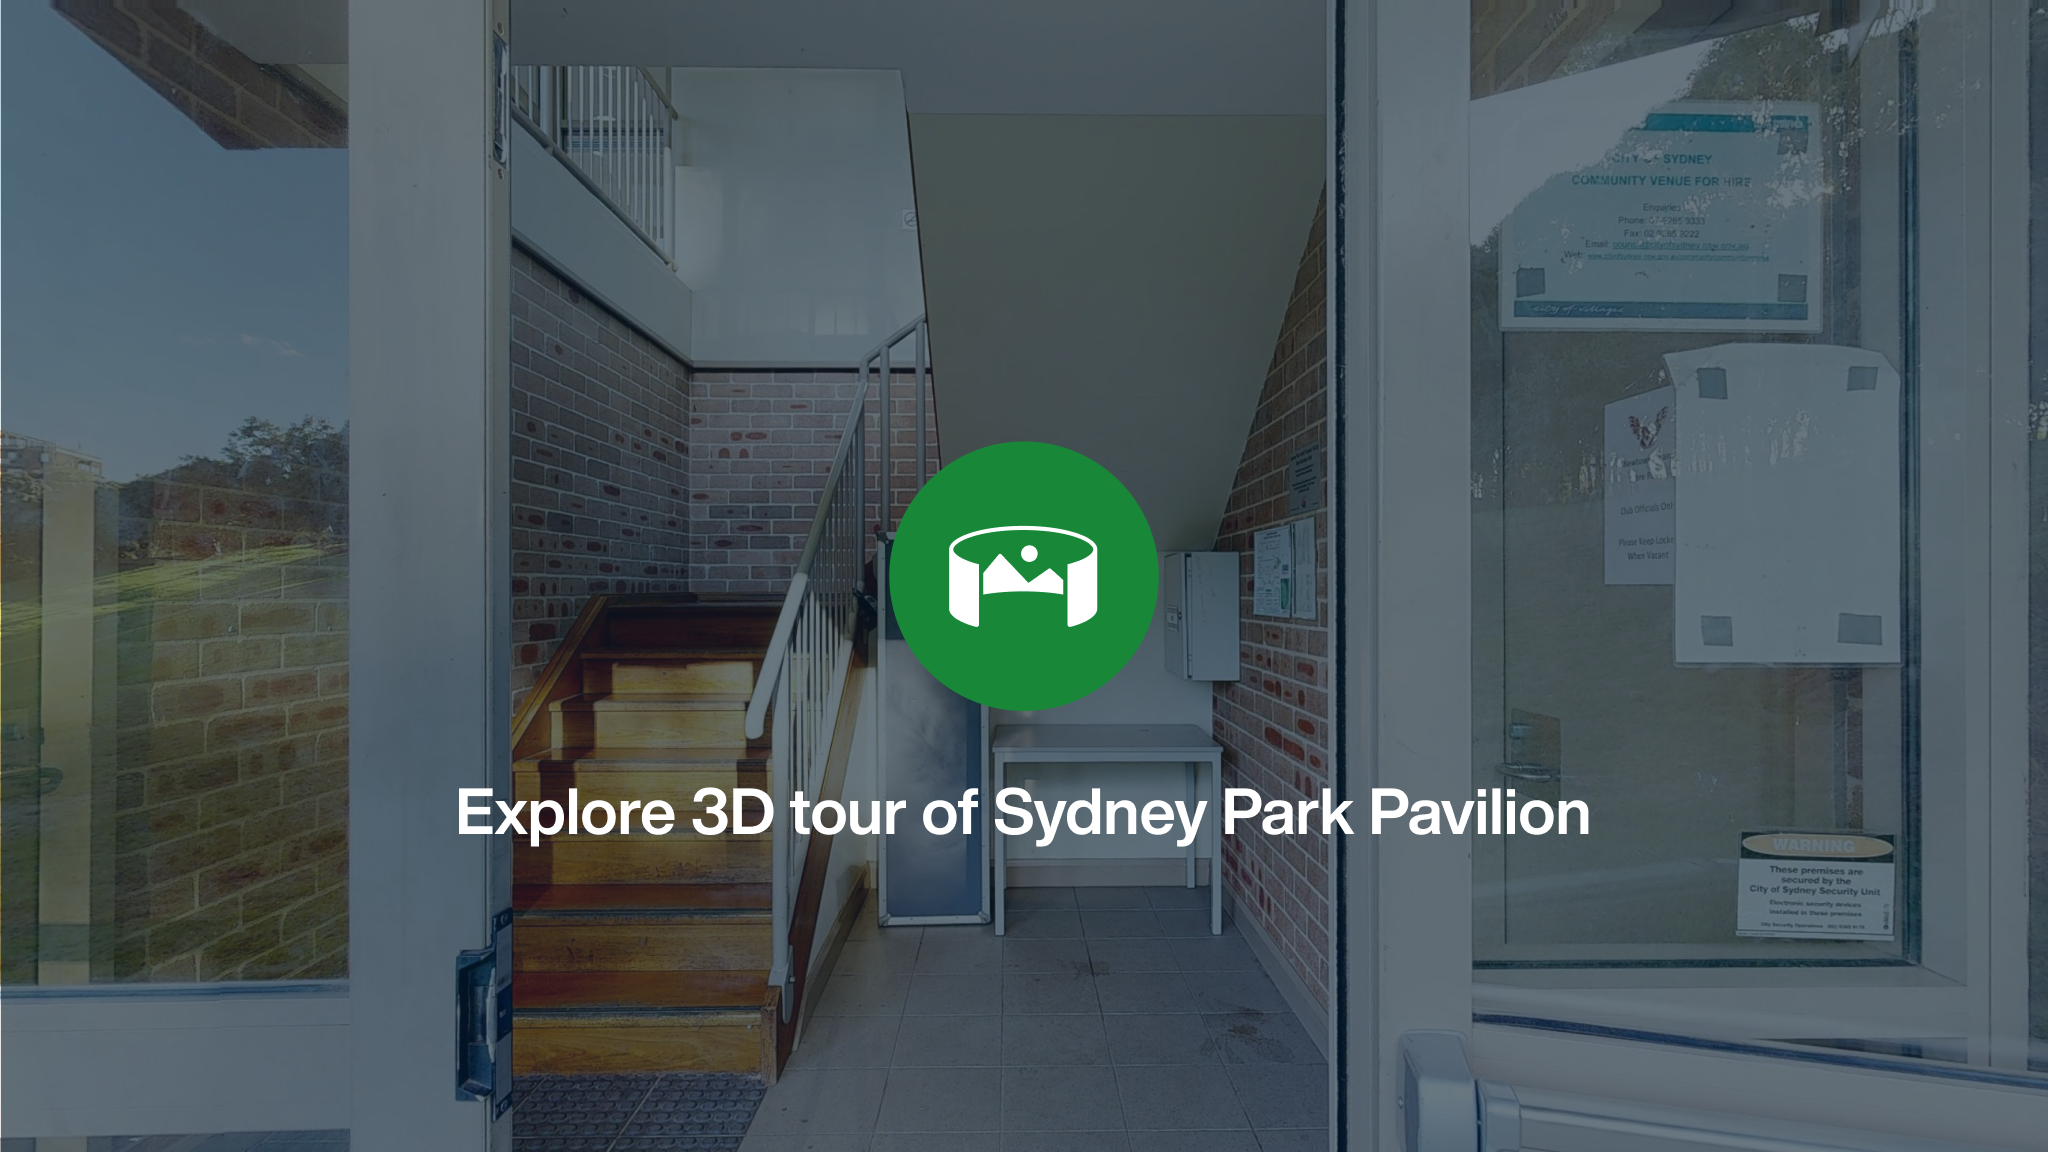 The front entrance to Sydney Park Pavilion overlayed with a green icon and the words Explore 3D tour of Sydney Park Pavilion,